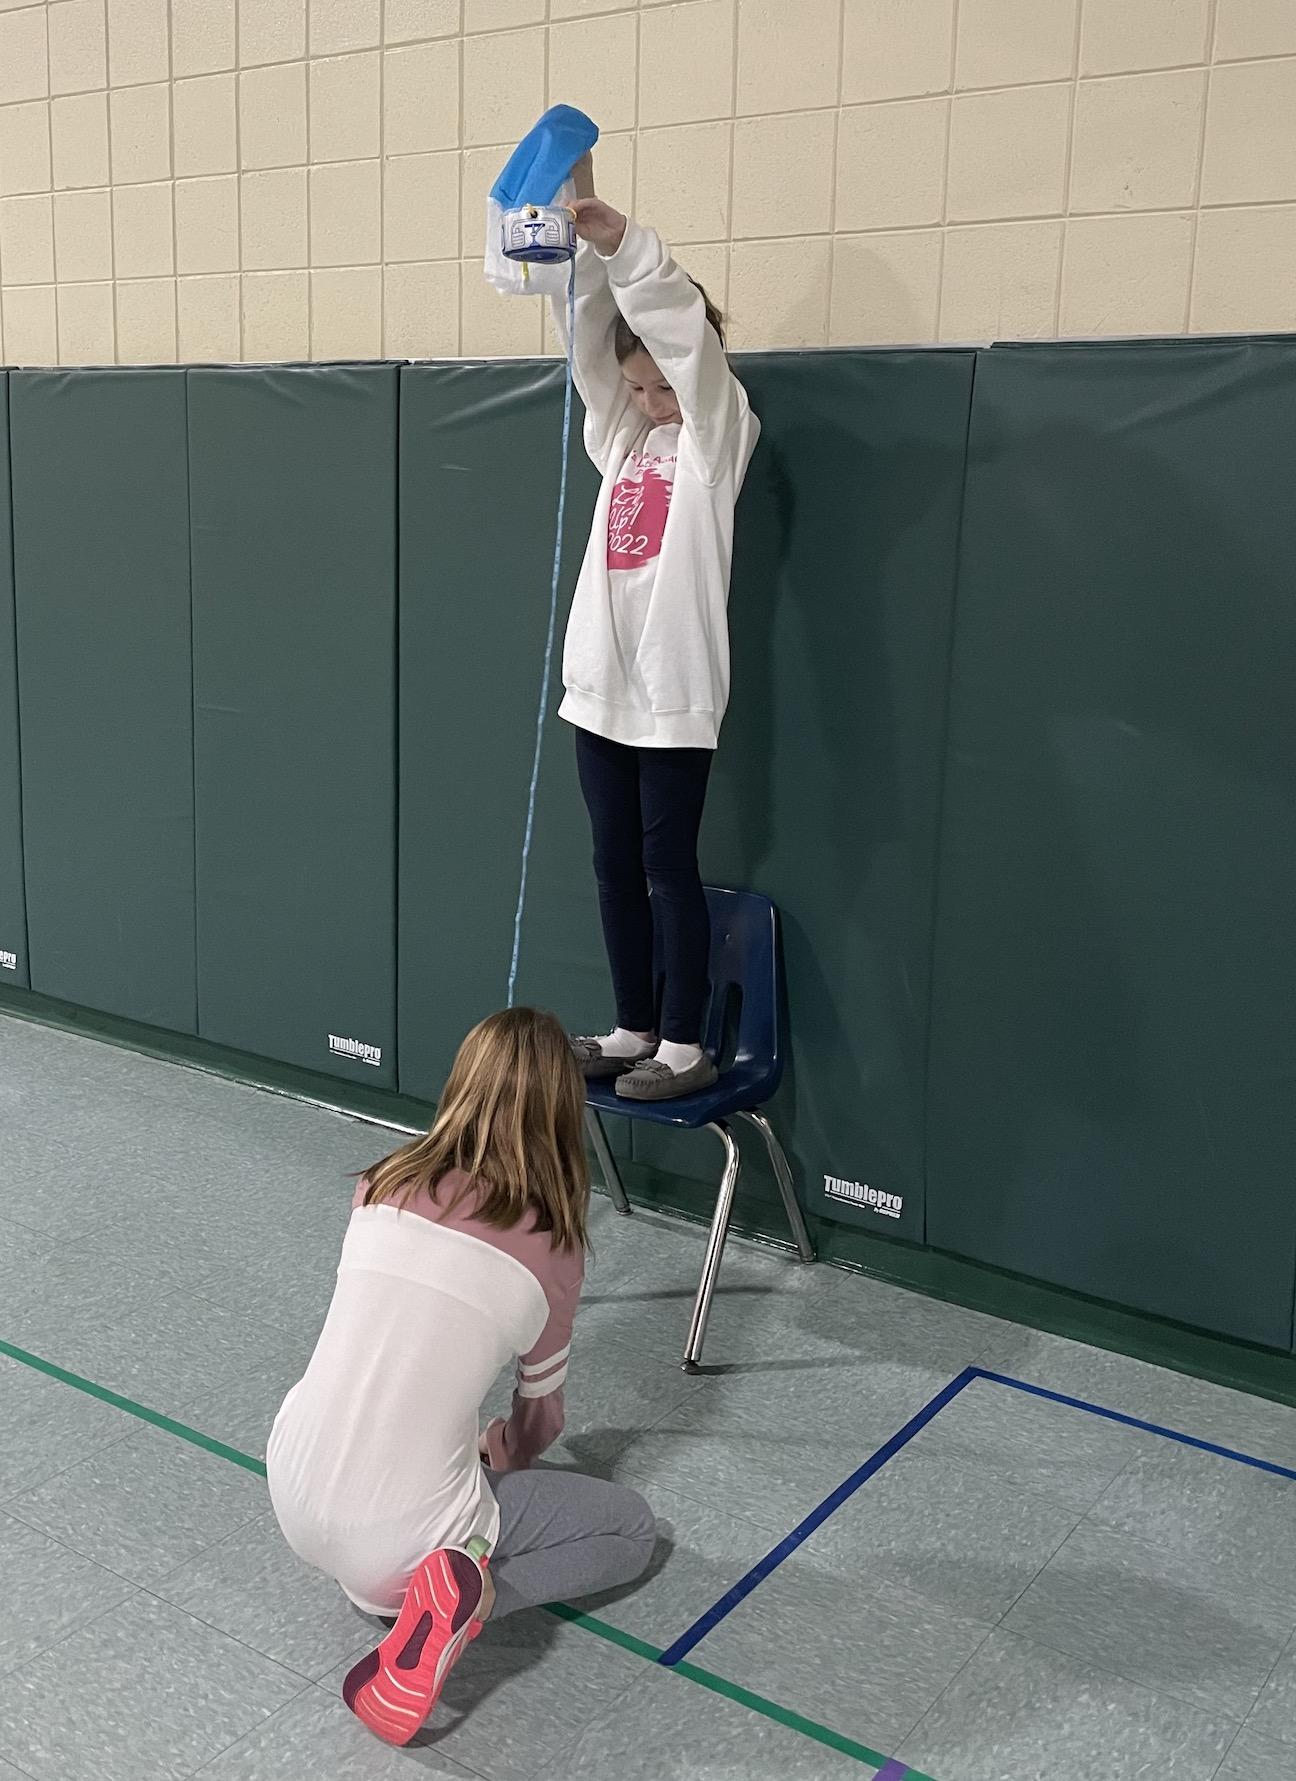 5th-graders Nia DiBernardo and Laney Rosenberry build a parachute that will allow items inside the basket to land slowly and gently